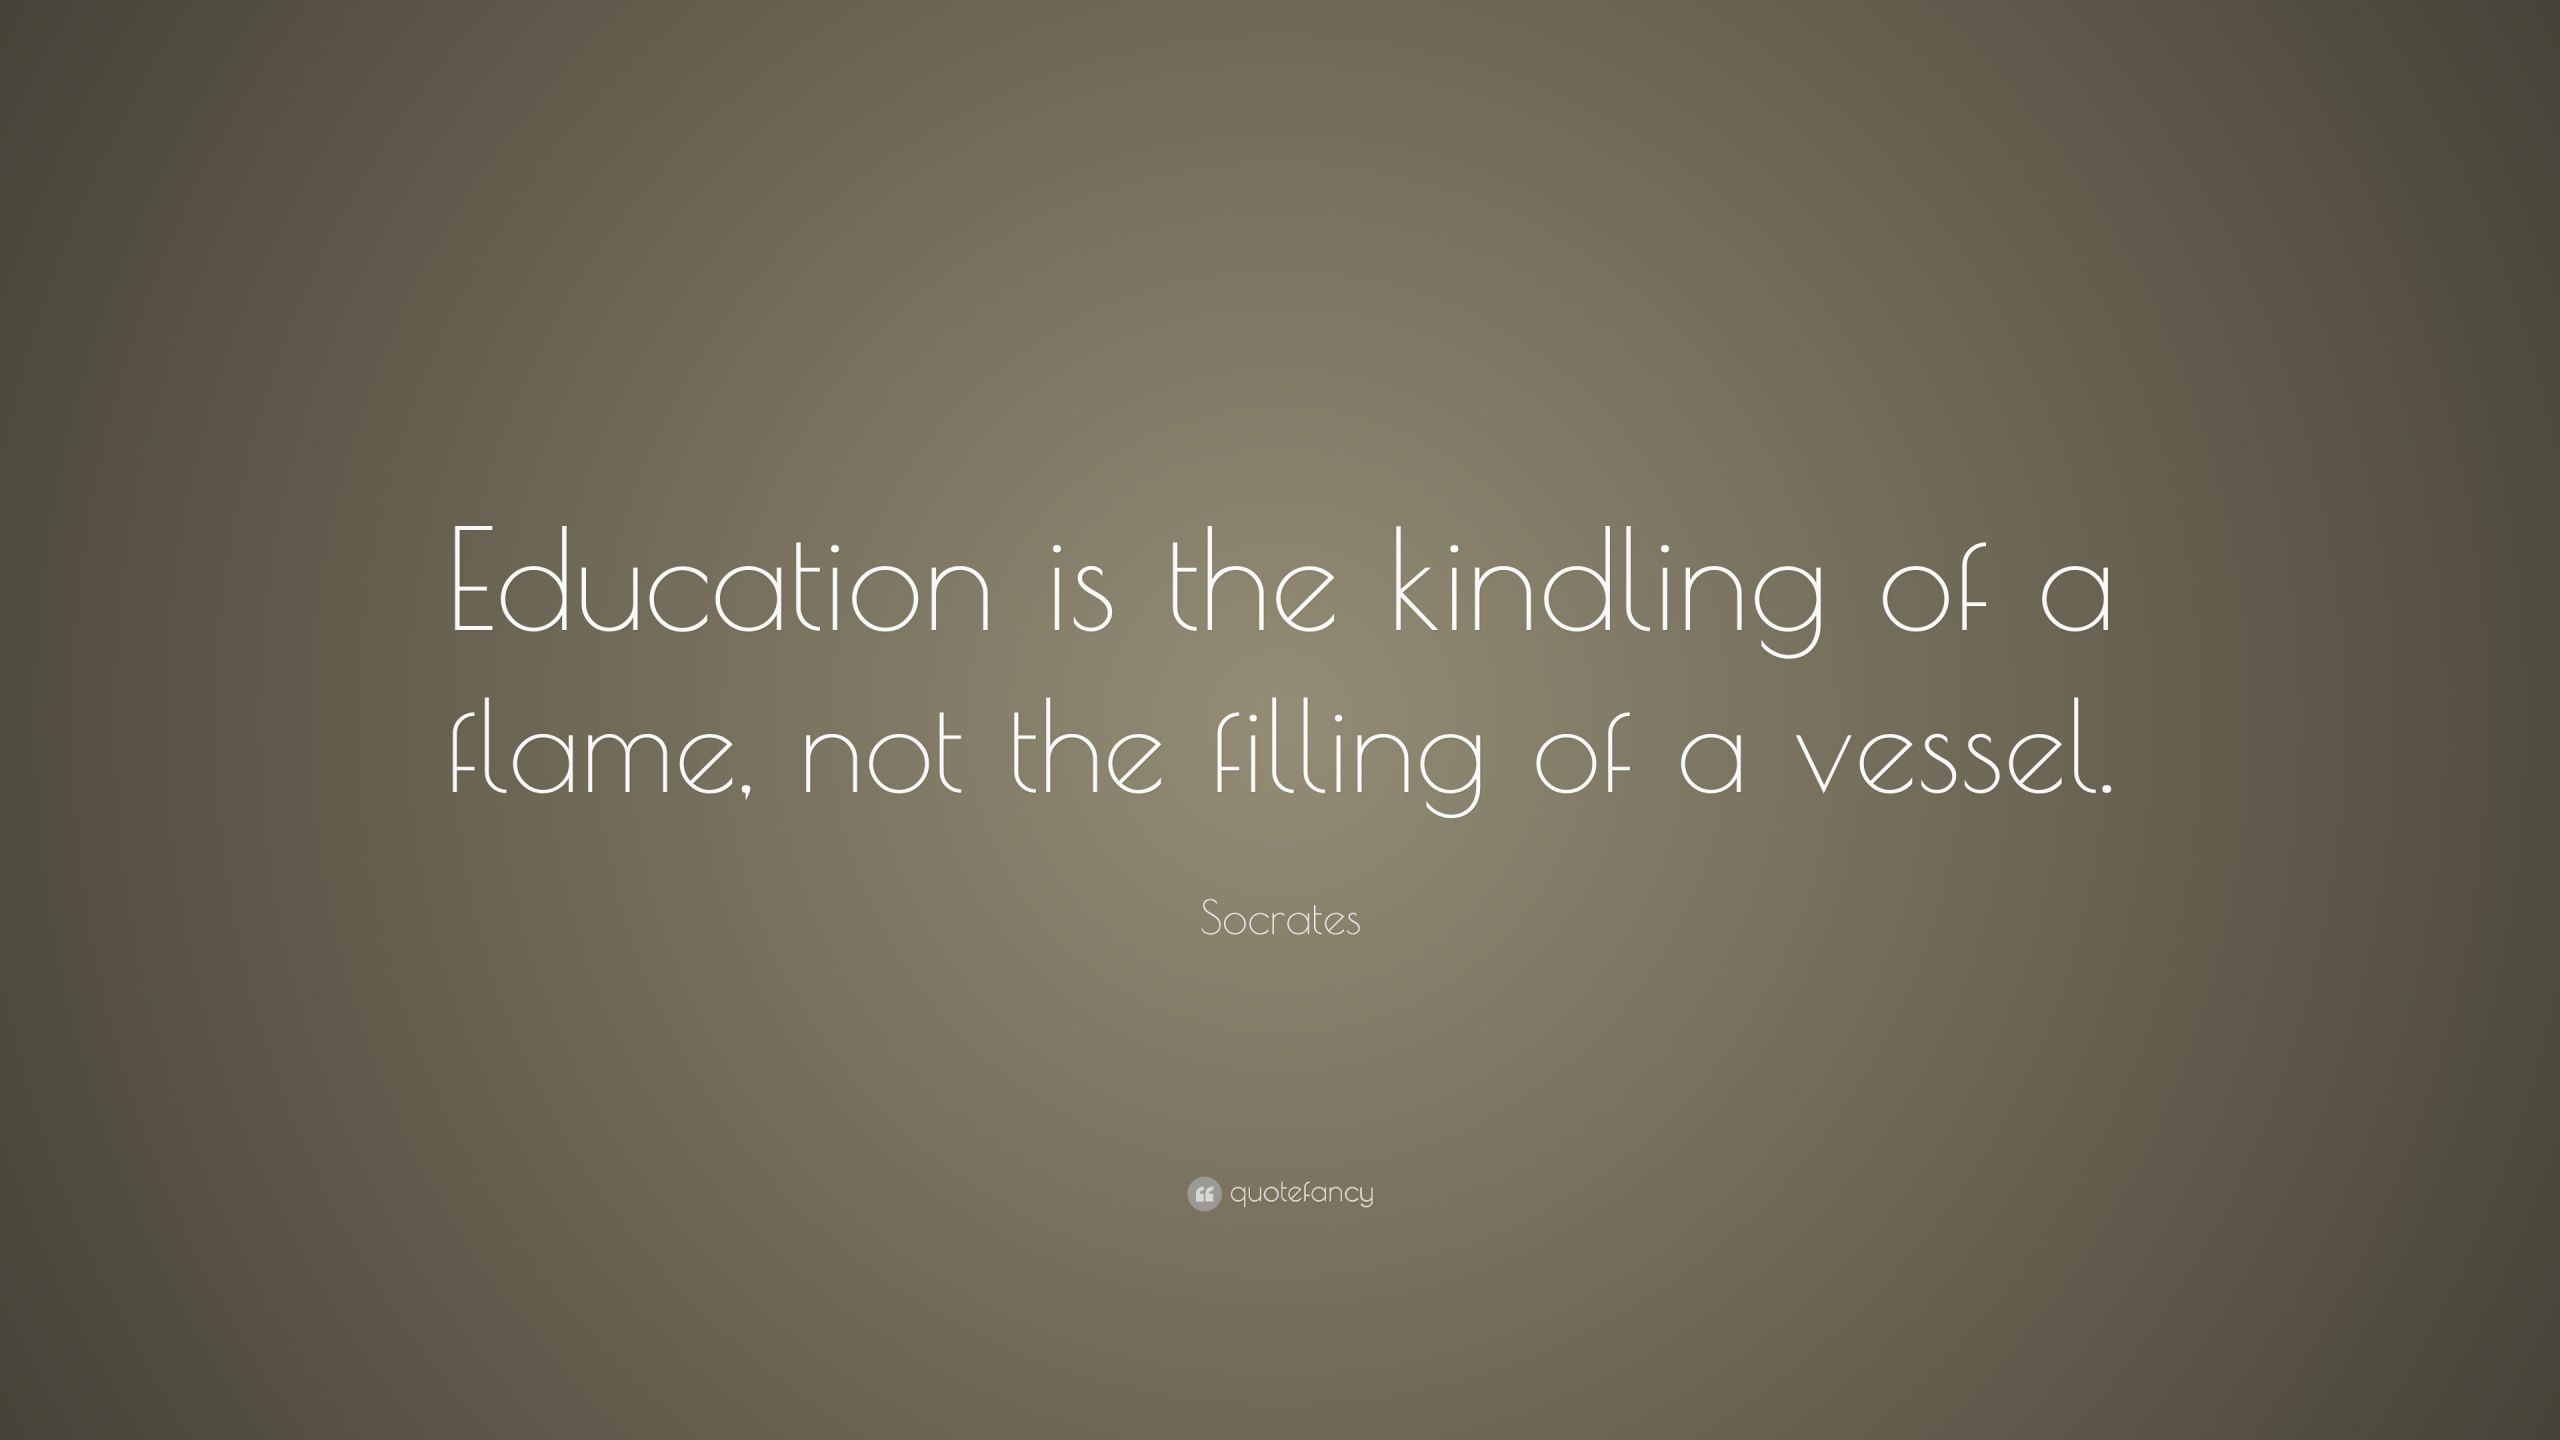 Socrates Education Quotes
 Socrates Quote “Education is the kindling of a flame not